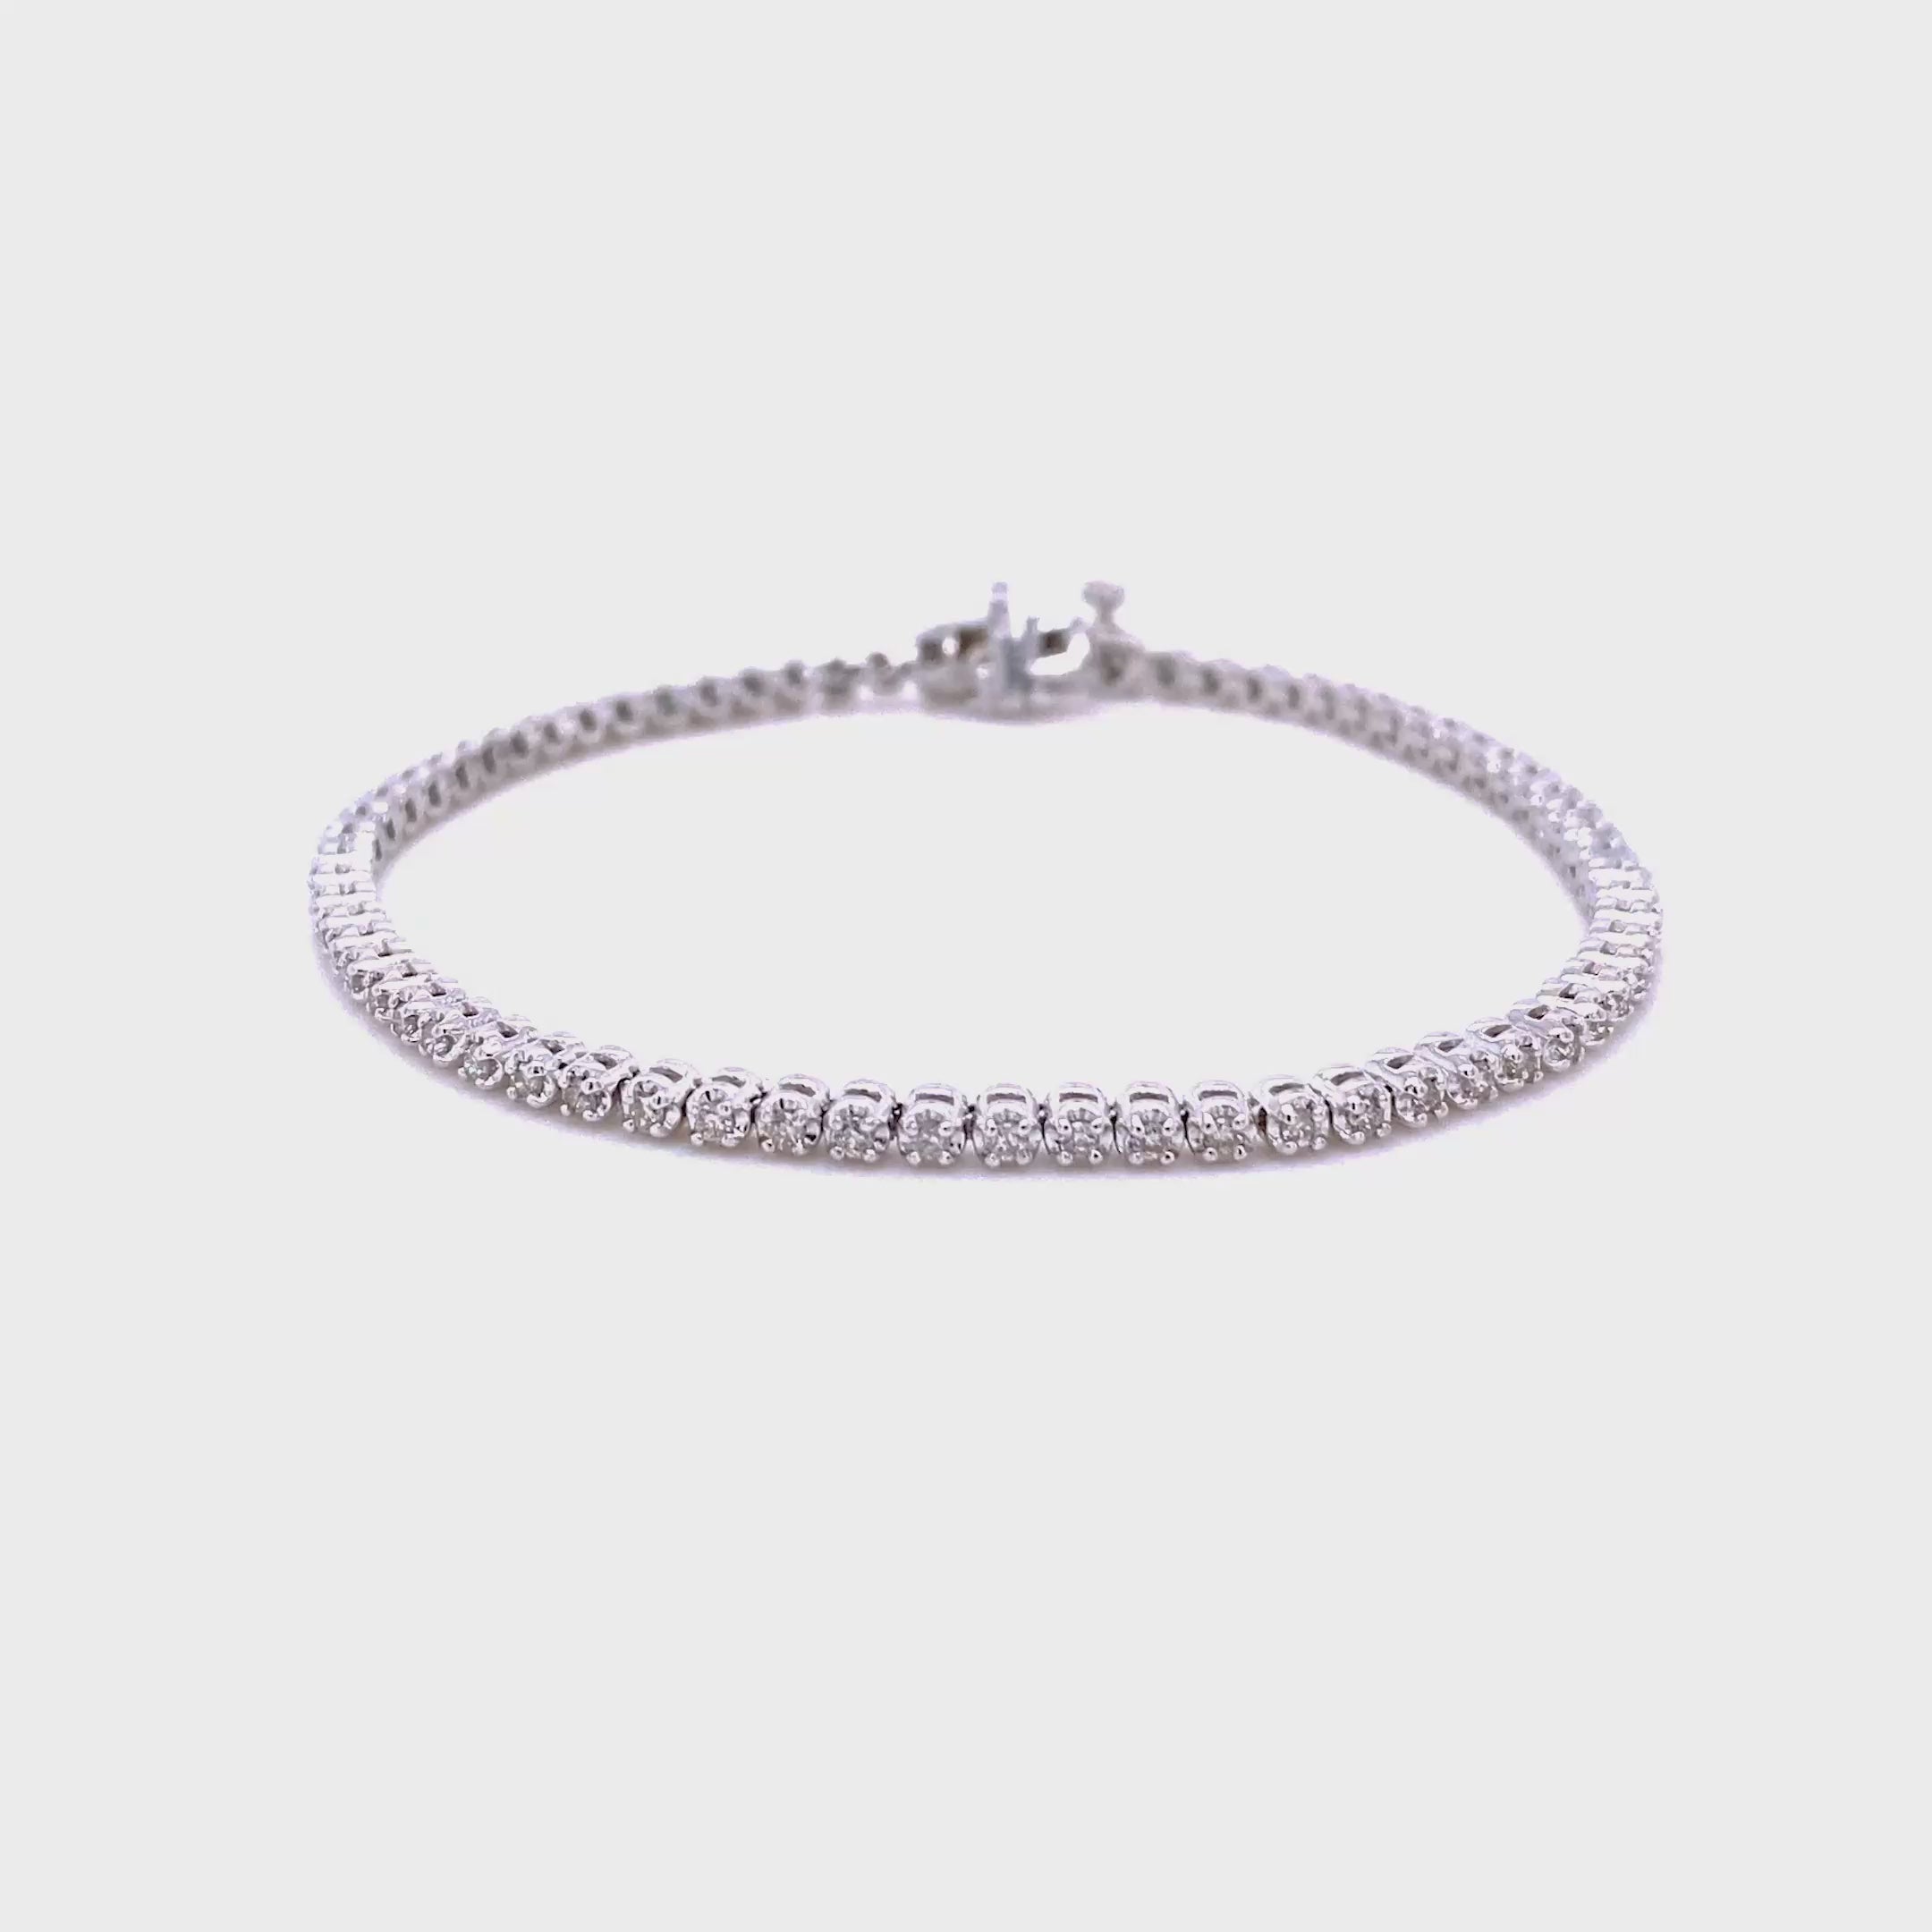 Sophisticated 1.00 CT Round Cut Diamond Tennis Bracelet in 14KT White Gold